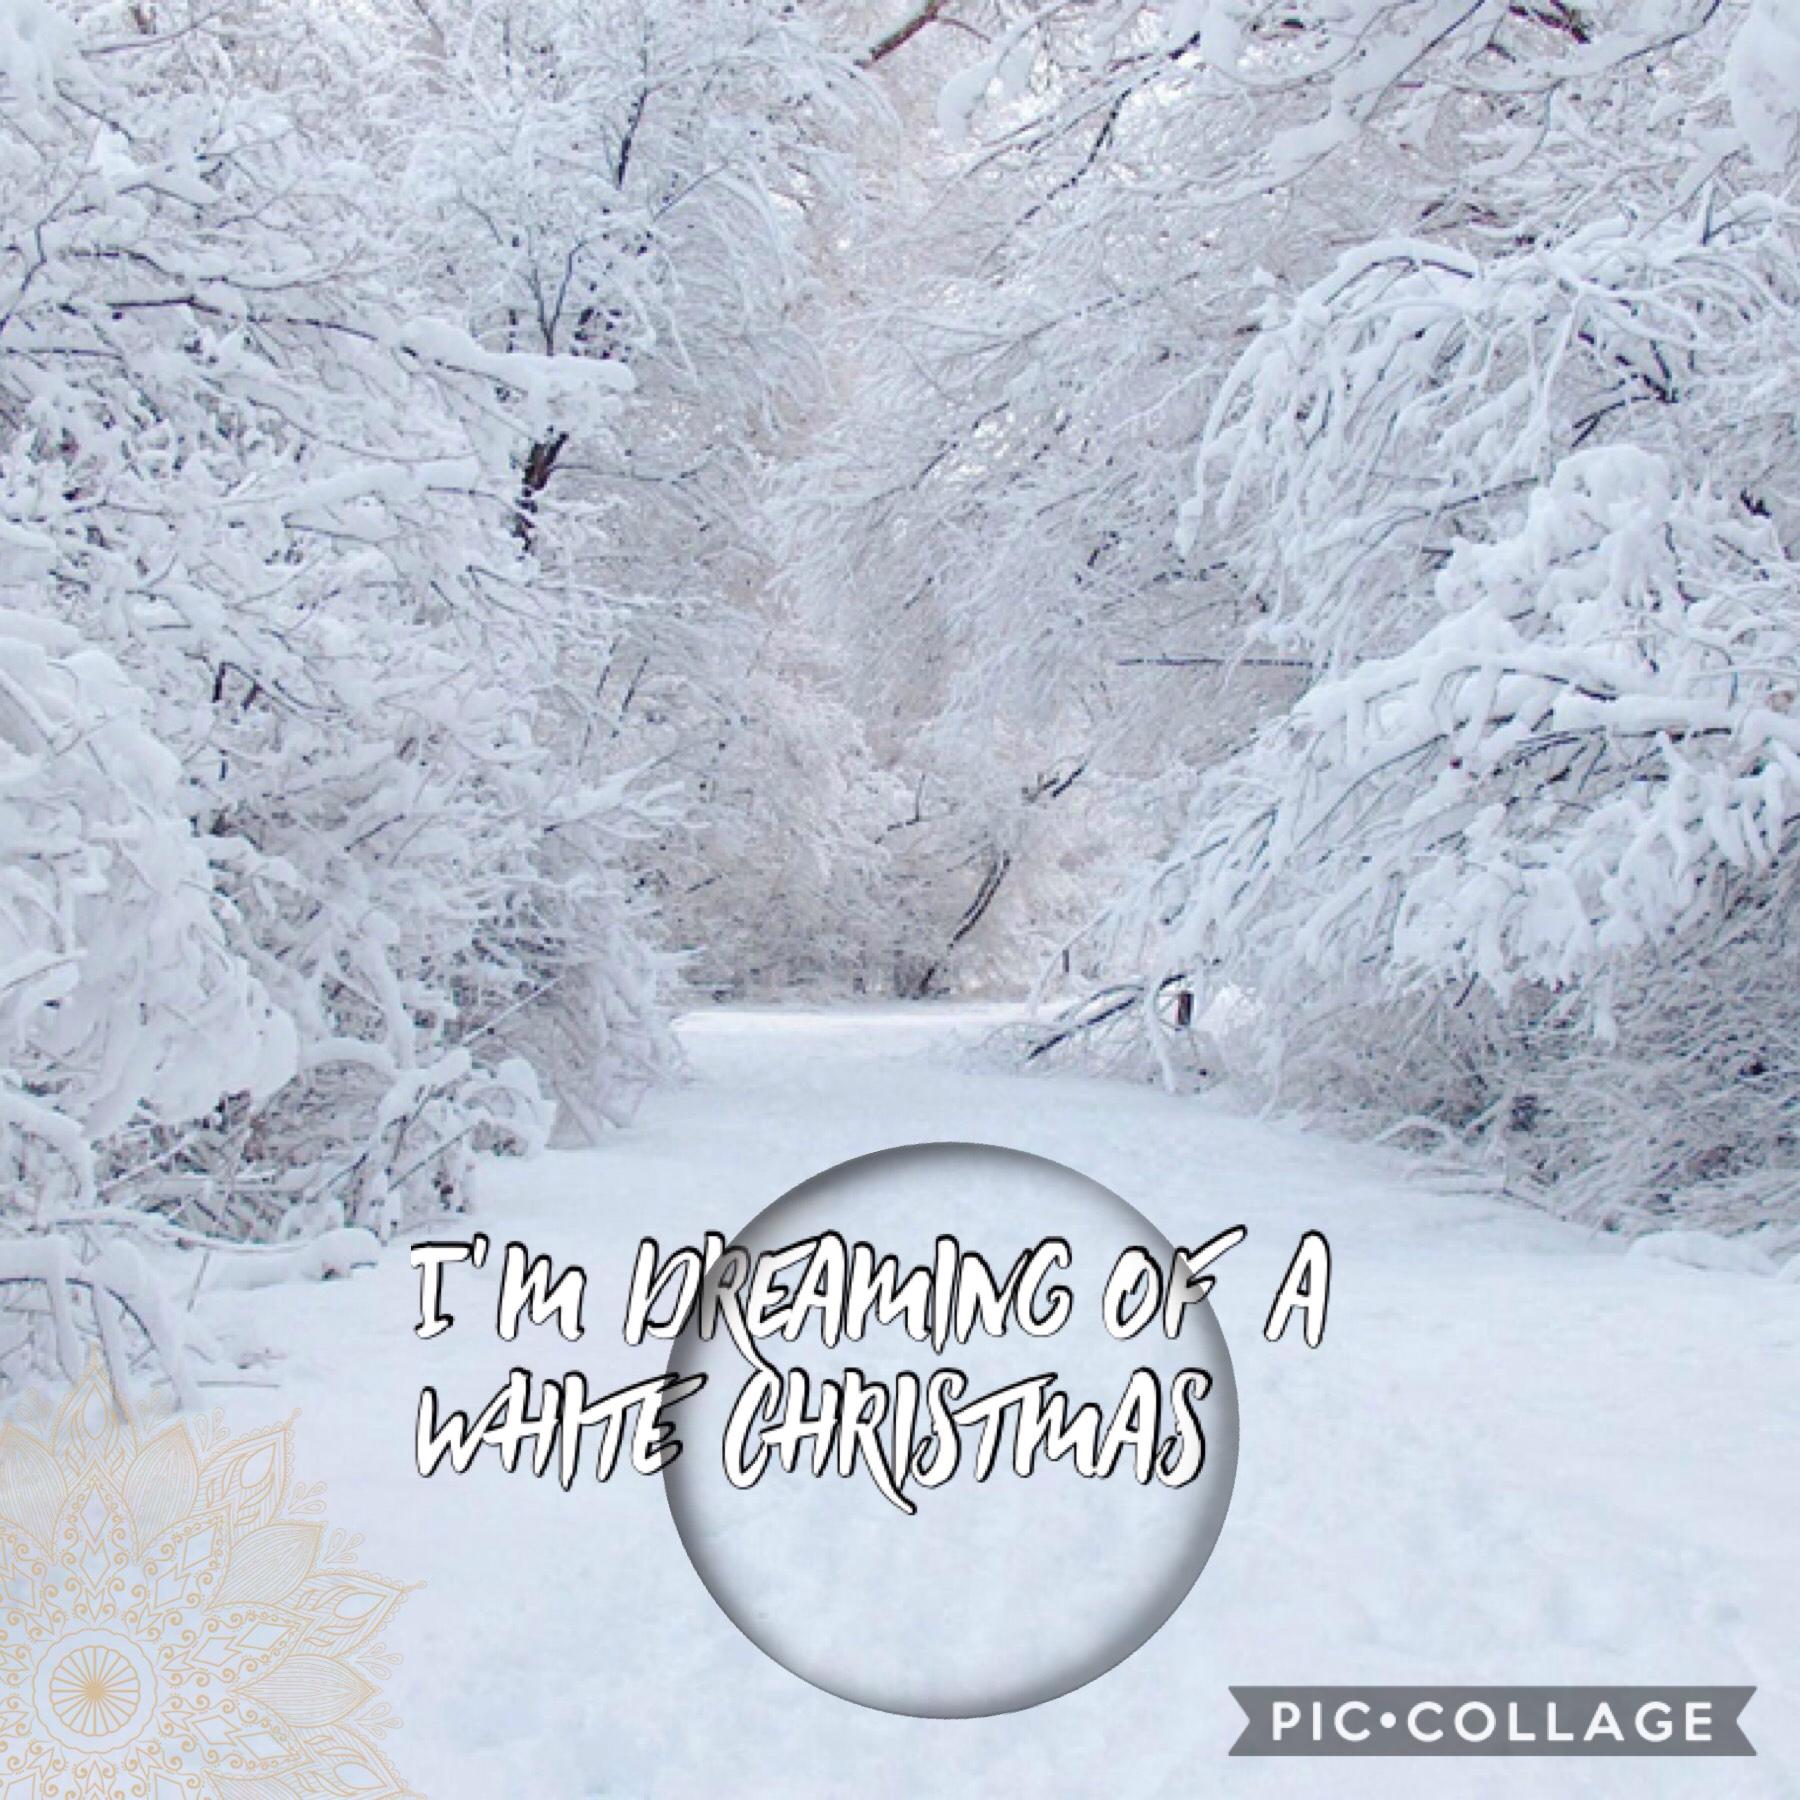 I'm dreaming of a white Christmas. Like and comment or remix if you know this song.